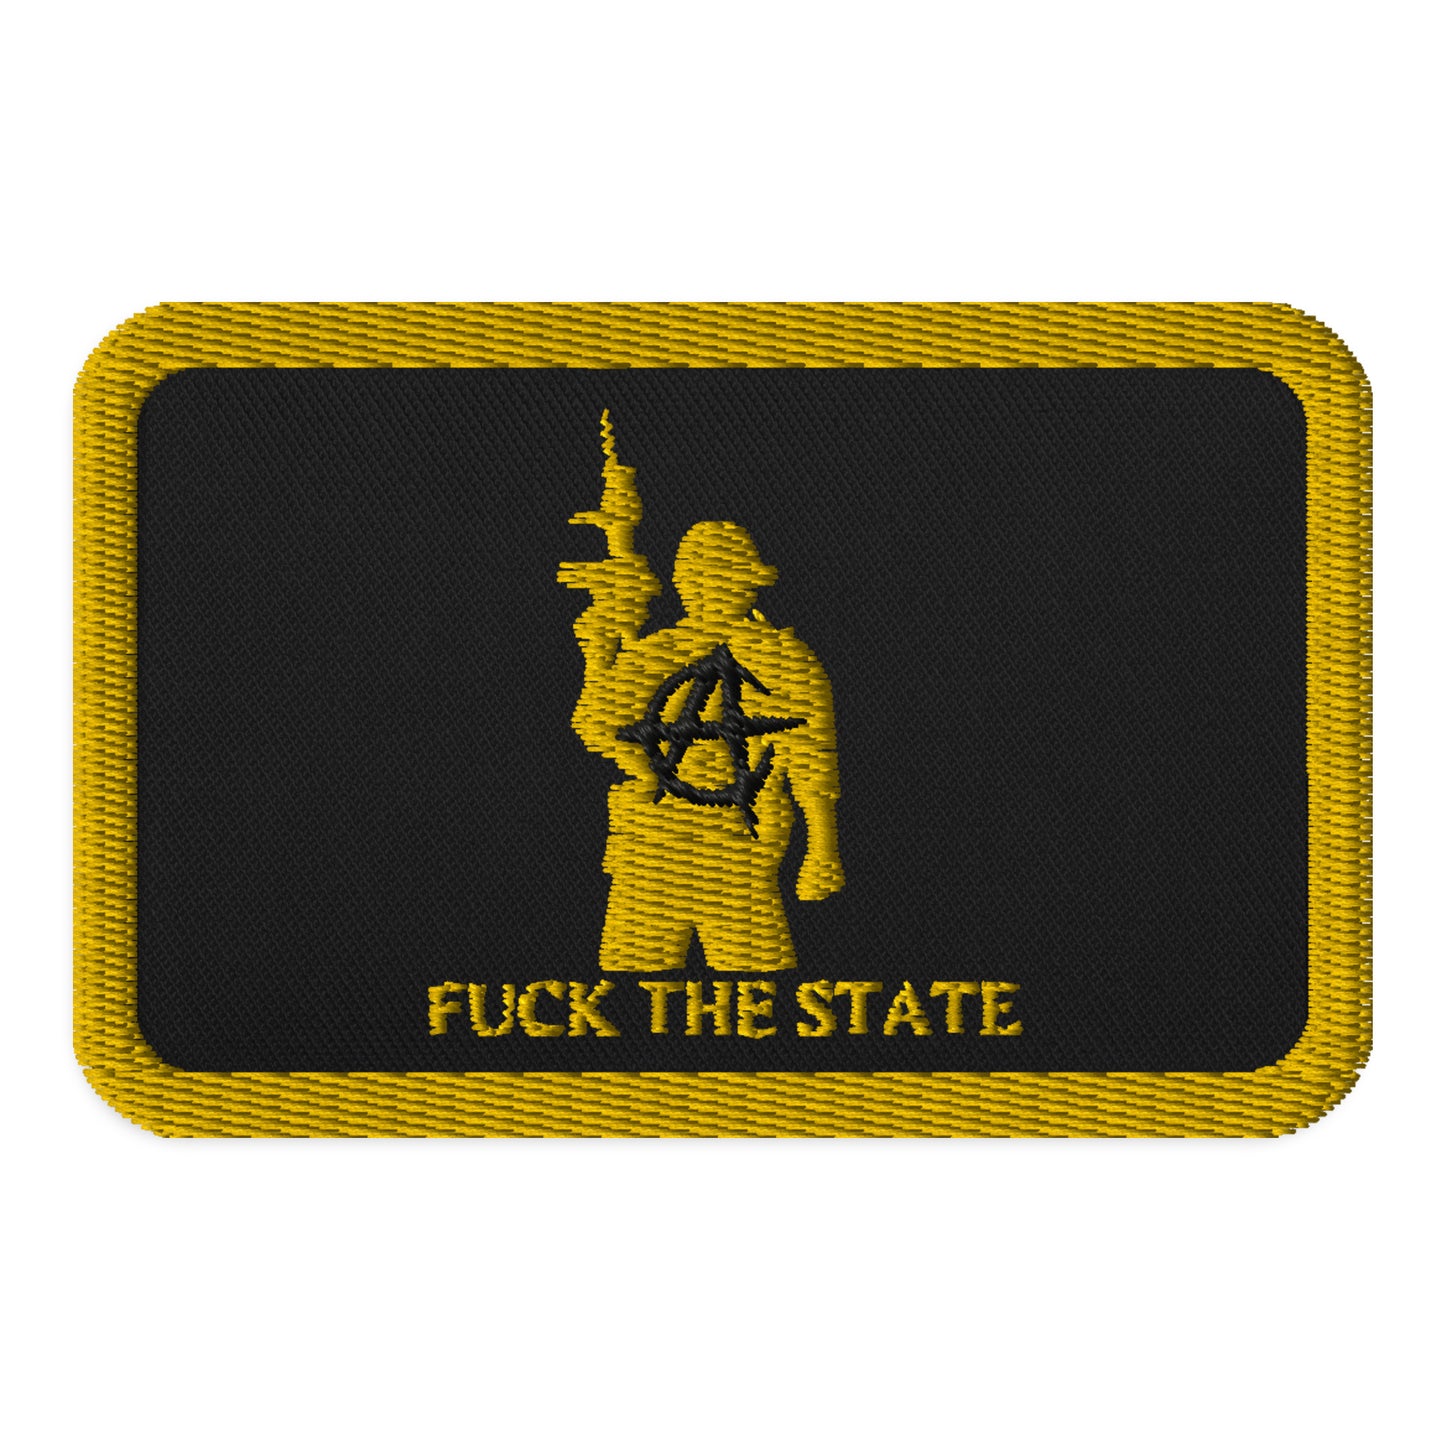 FUCK THE STATE Gold By @AncapAir Patch 3.5"x2.25"